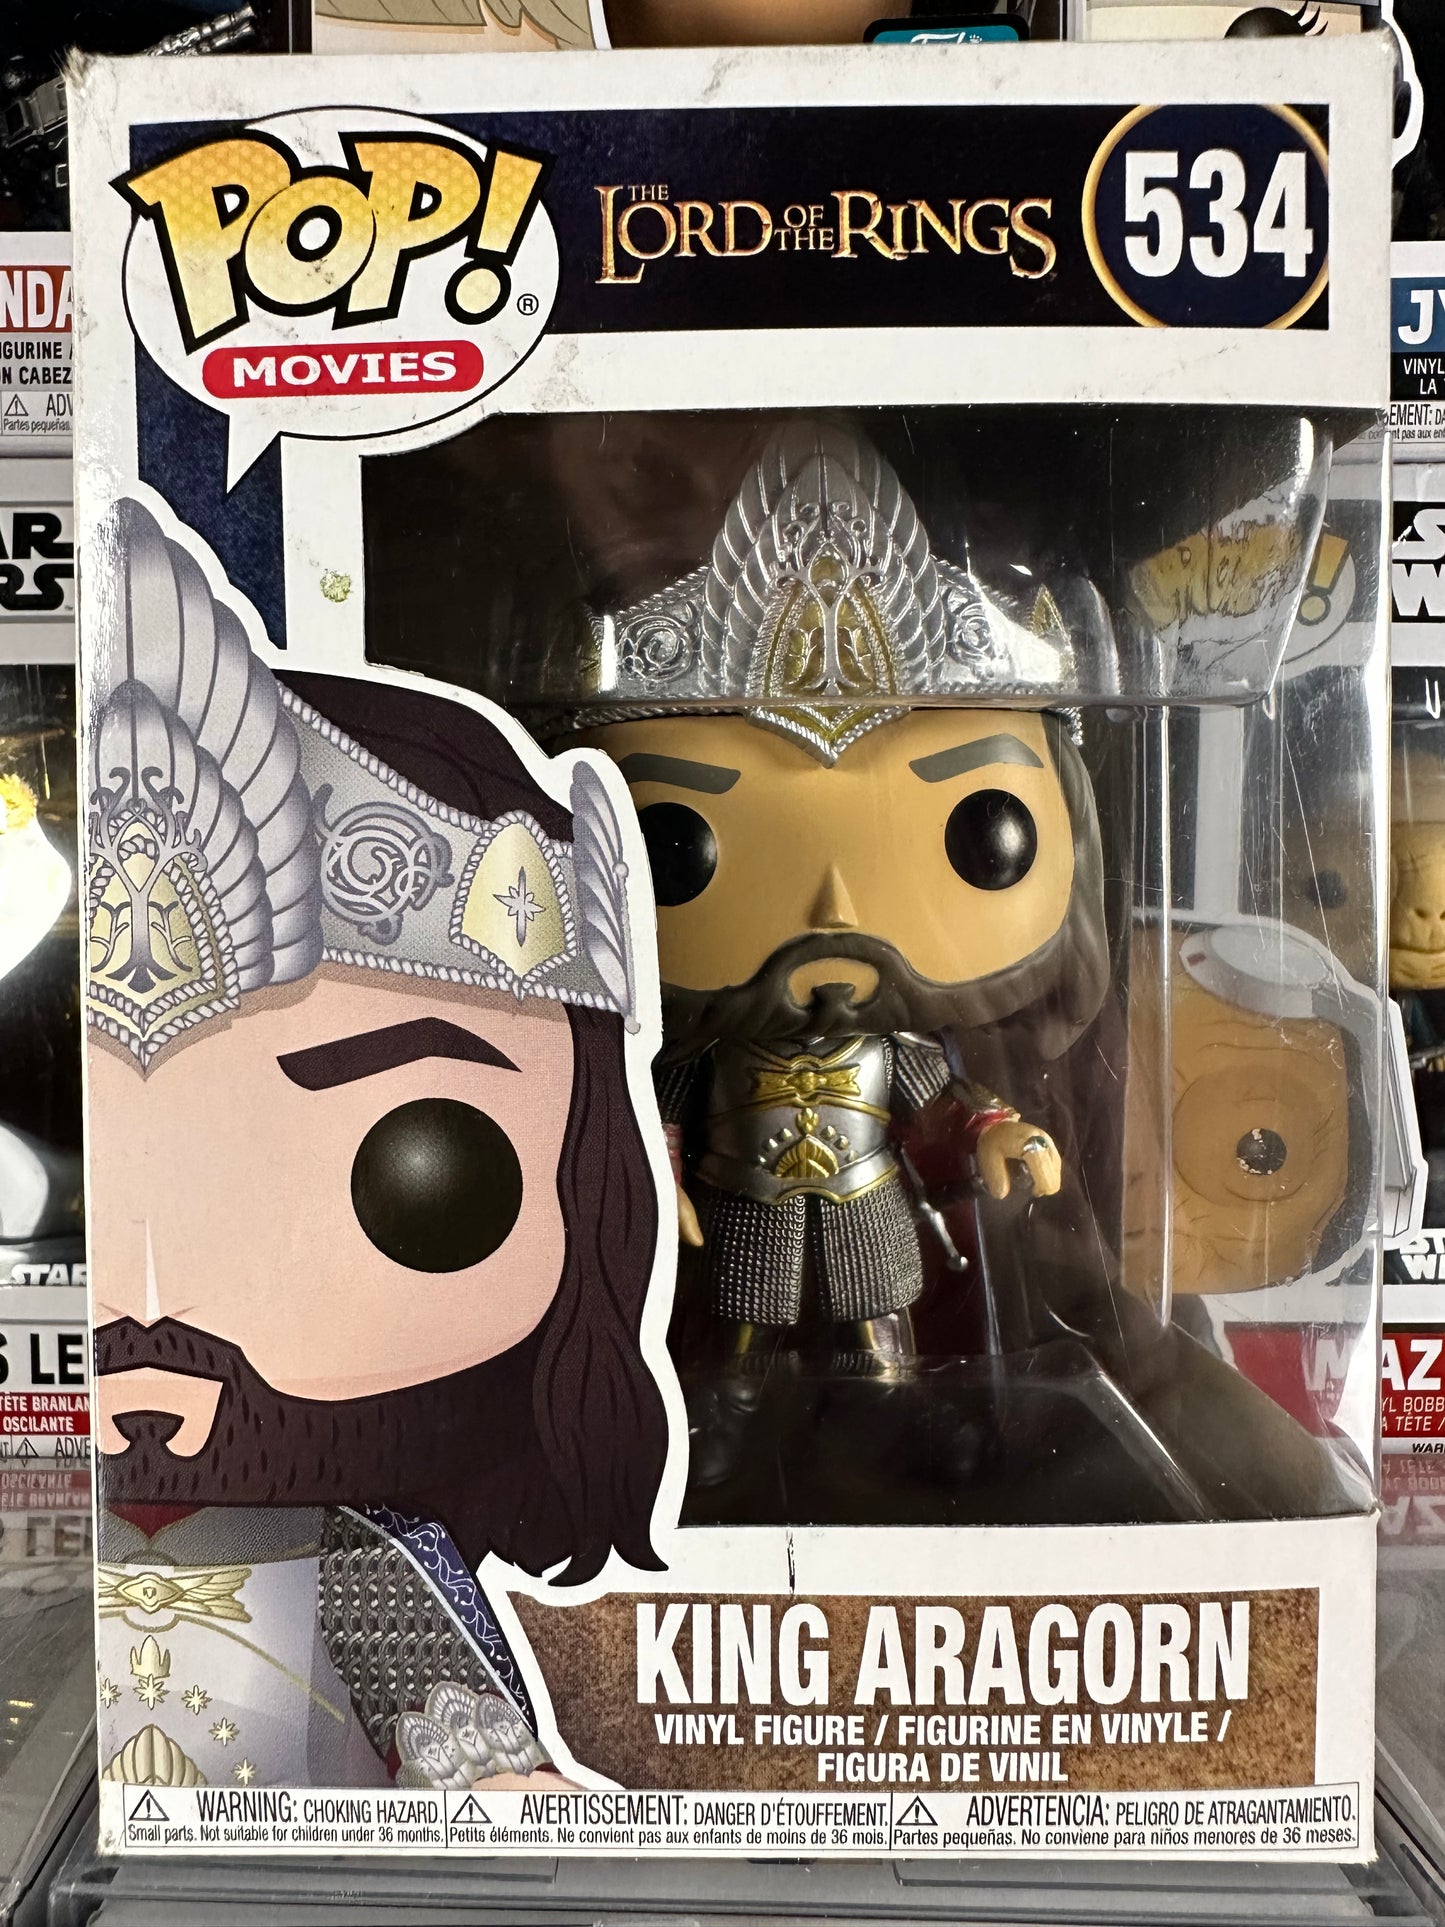 The Lord of the Rings - King Aragorn (534) Vaulted